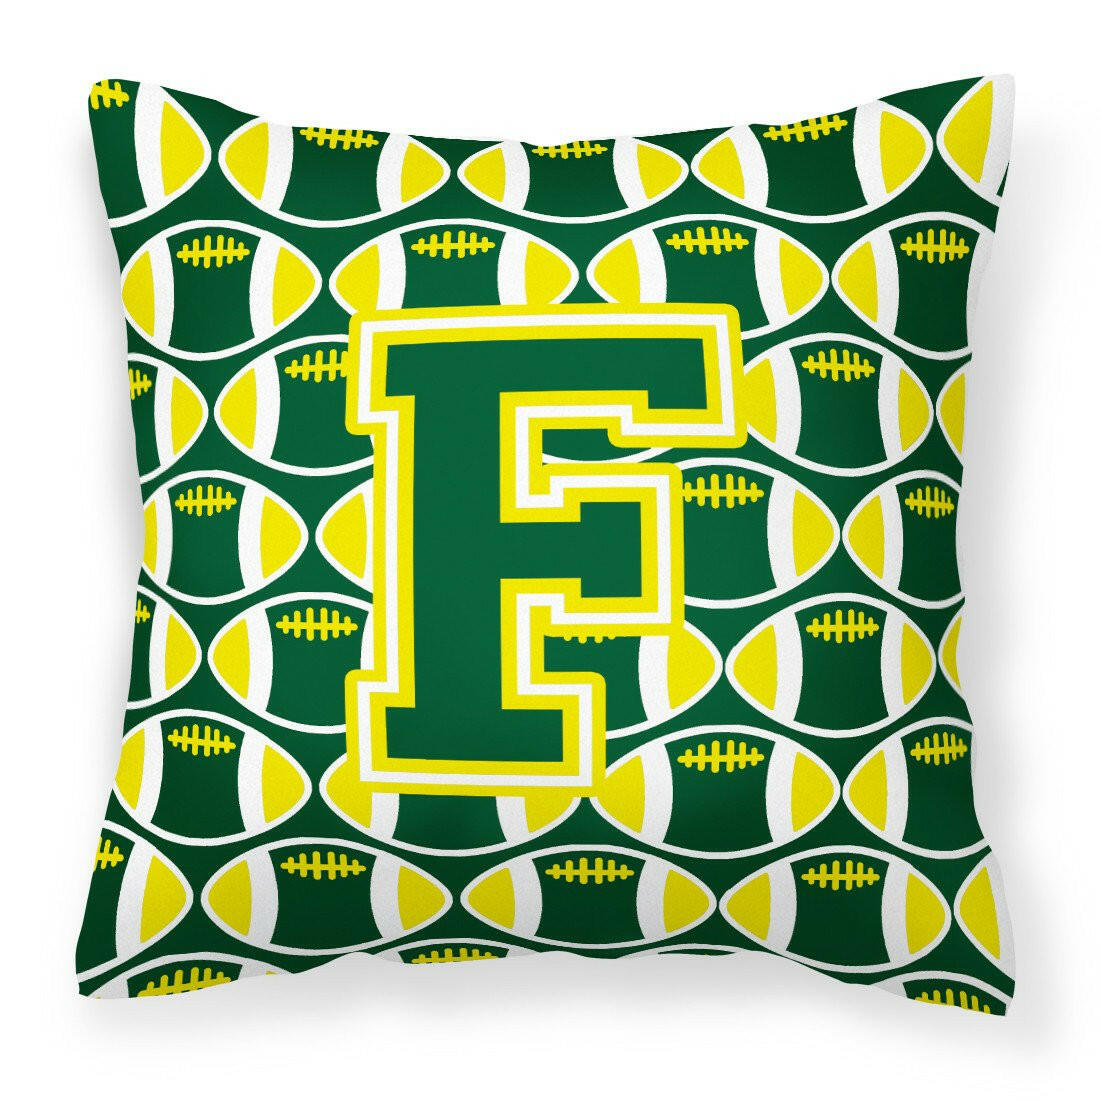 Letter F Football Green and Yellow Fabric Decorative Pillow CJ1075-FPW1414 by Caroline's Treasures